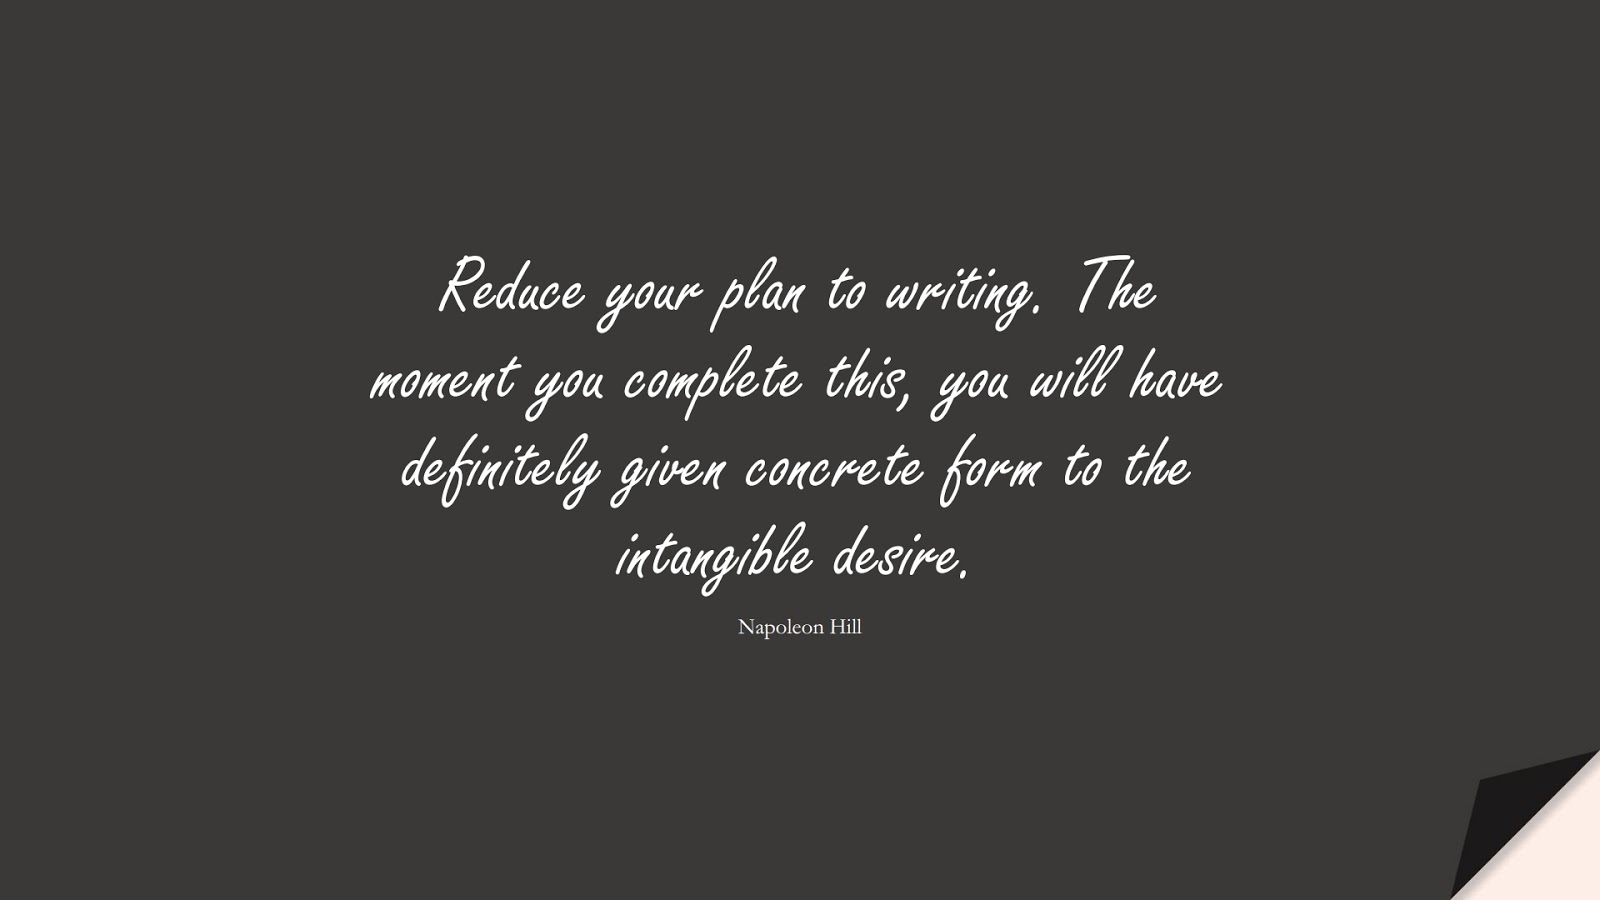 Reduce your plan to writing. The moment you complete this, you will have definitely given concrete form to the intangible desire. (Napoleon Hill);  #InspirationalQuotes